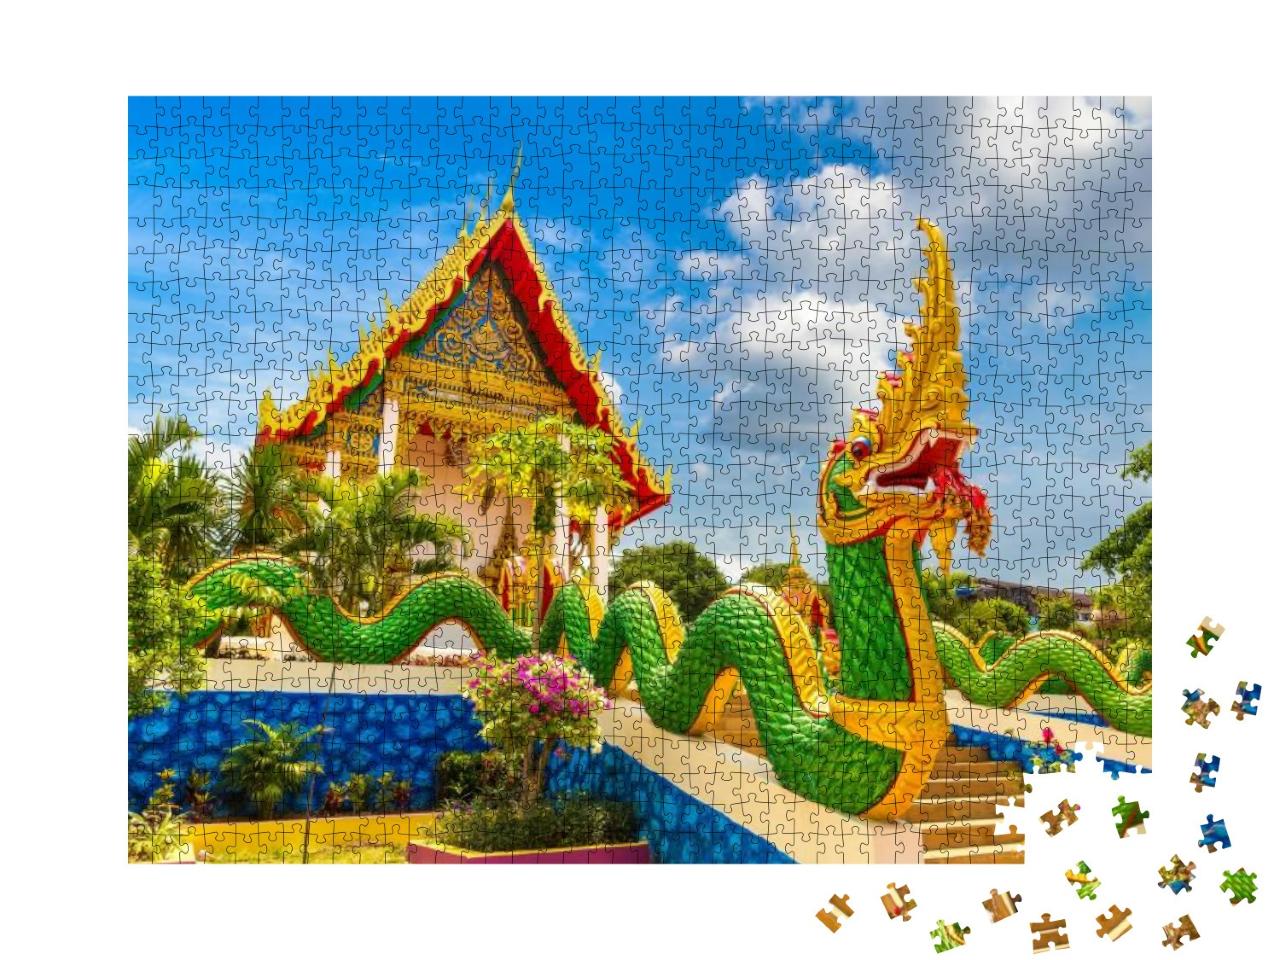 Karon Temple At Phuket in Thailand in a Summer Day... Jigsaw Puzzle with 1000 pieces